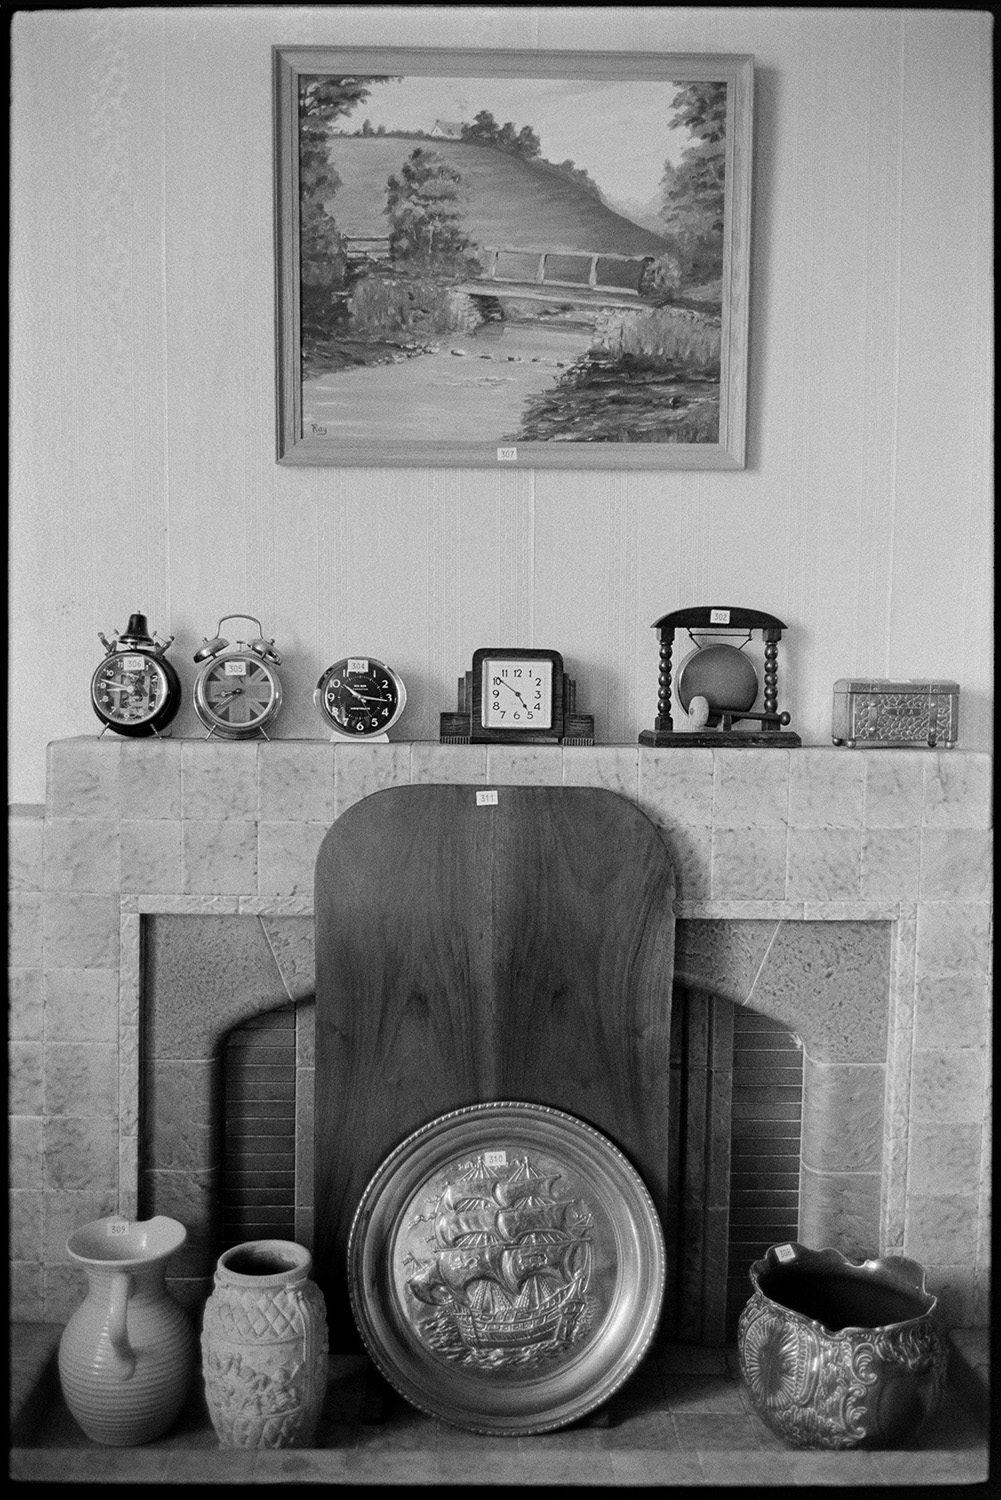 China, clocks and ornaments on viewing day, before house sale fireplace, painting. 
[Jugs, clocks, a gong, metal platter with a ship design and a painting displayed by a fireplace at Arscotts House, Dolton, on the viewing day before the contents of the house are sold.]